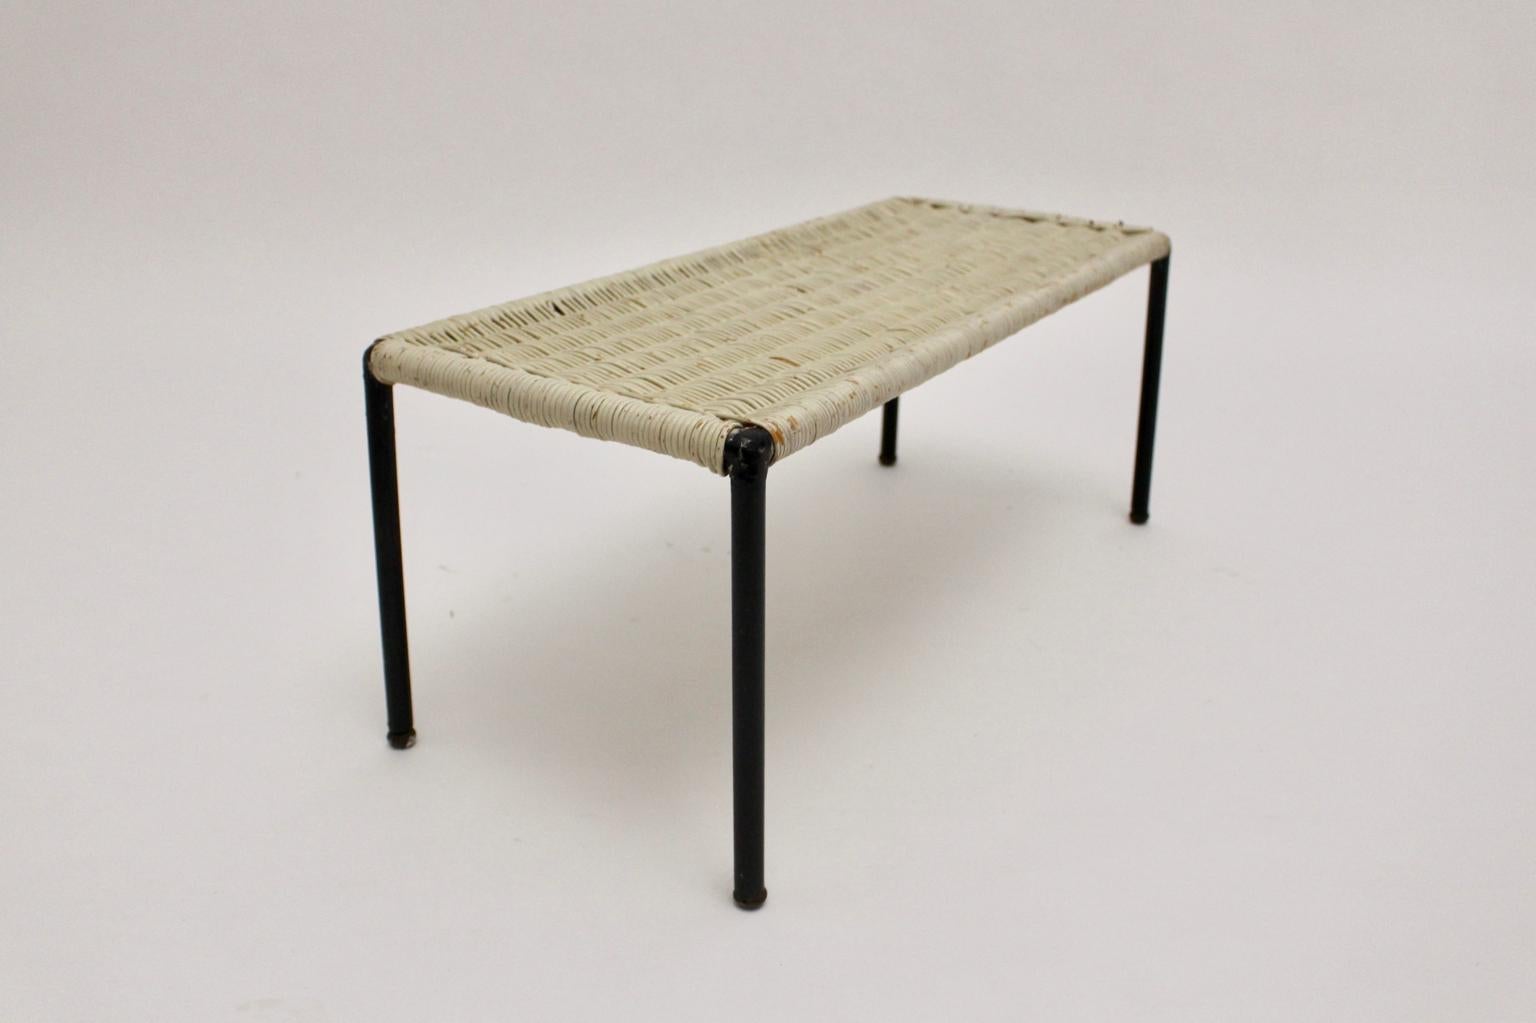 20th Century Mid-Century Modern White Wicker Side Table 1950s Austria For Sale